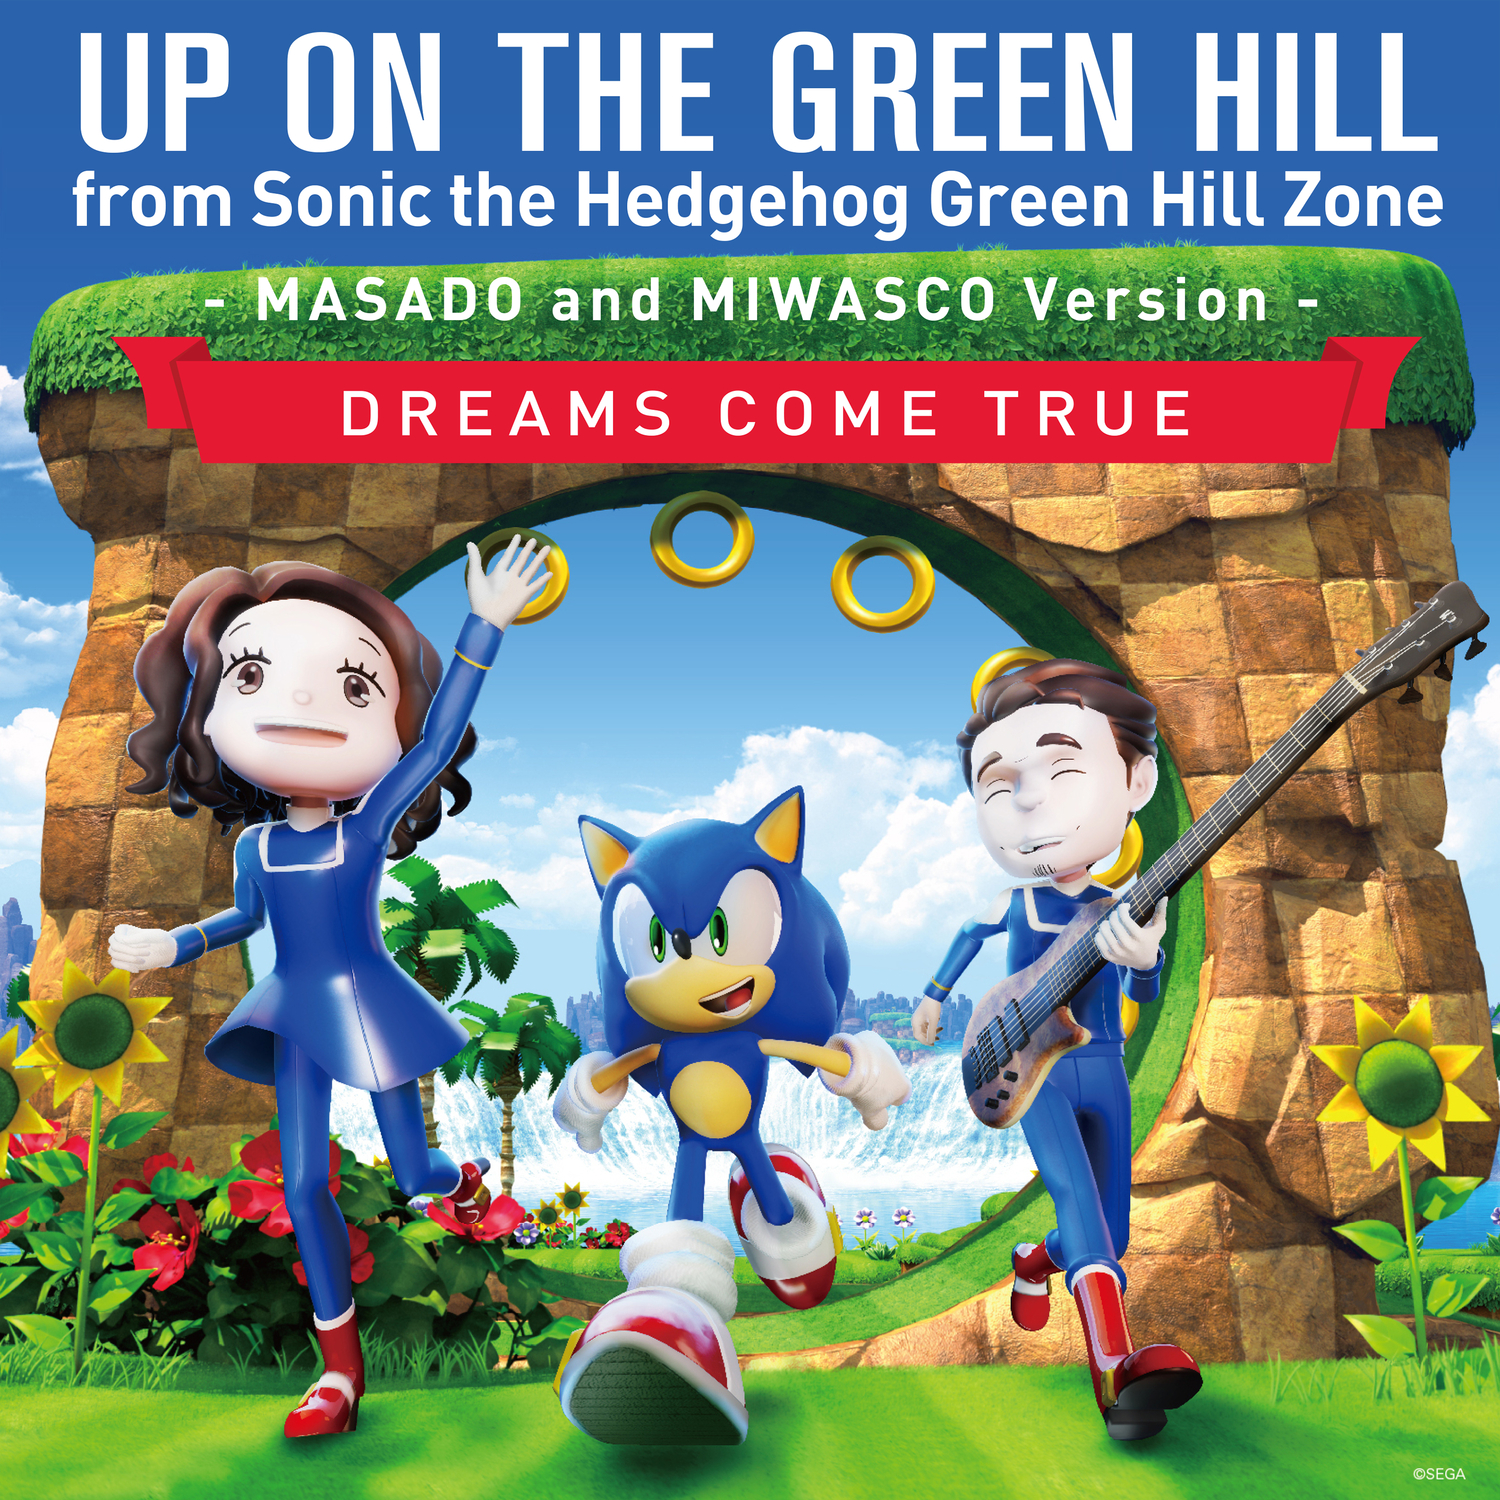 https://static.wikia.nocookie.net/sonic/images/b/b3/Up-On-The-Green-Hill.jpg/revision/latest?cb=20221101144224